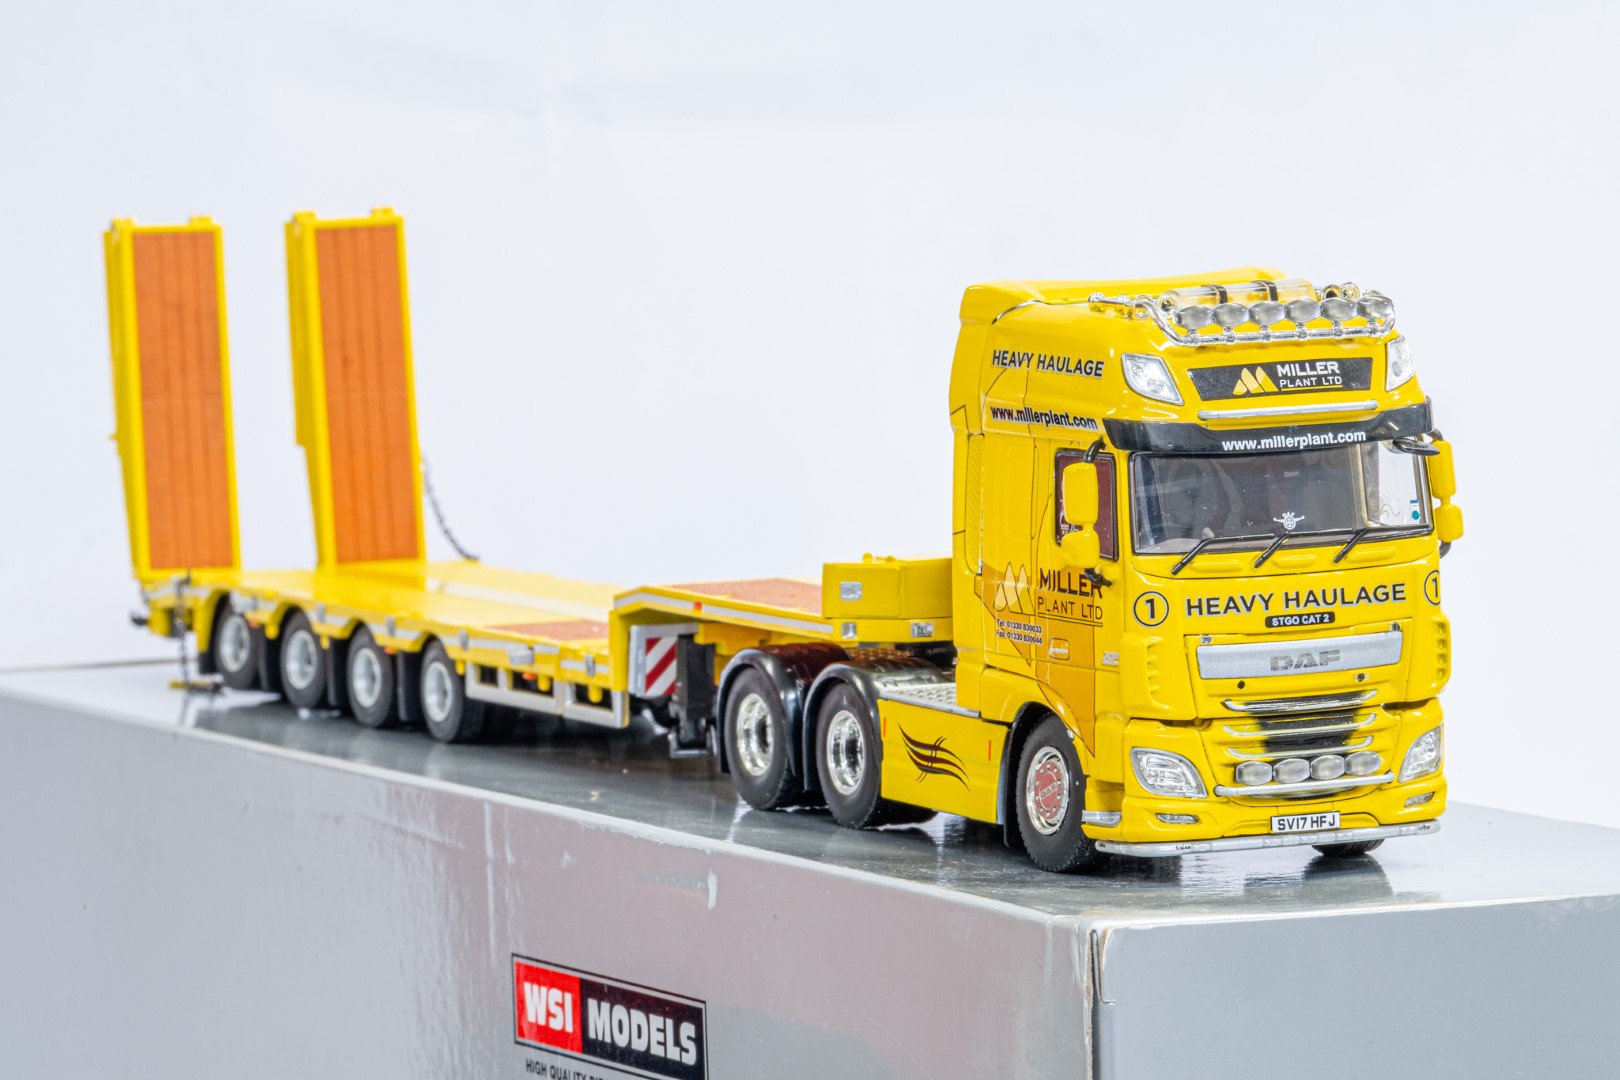 WSI DAF XF SSC 6x4 4 Axle Low Loader Trailer - Miller Plant - Image 7 of 7